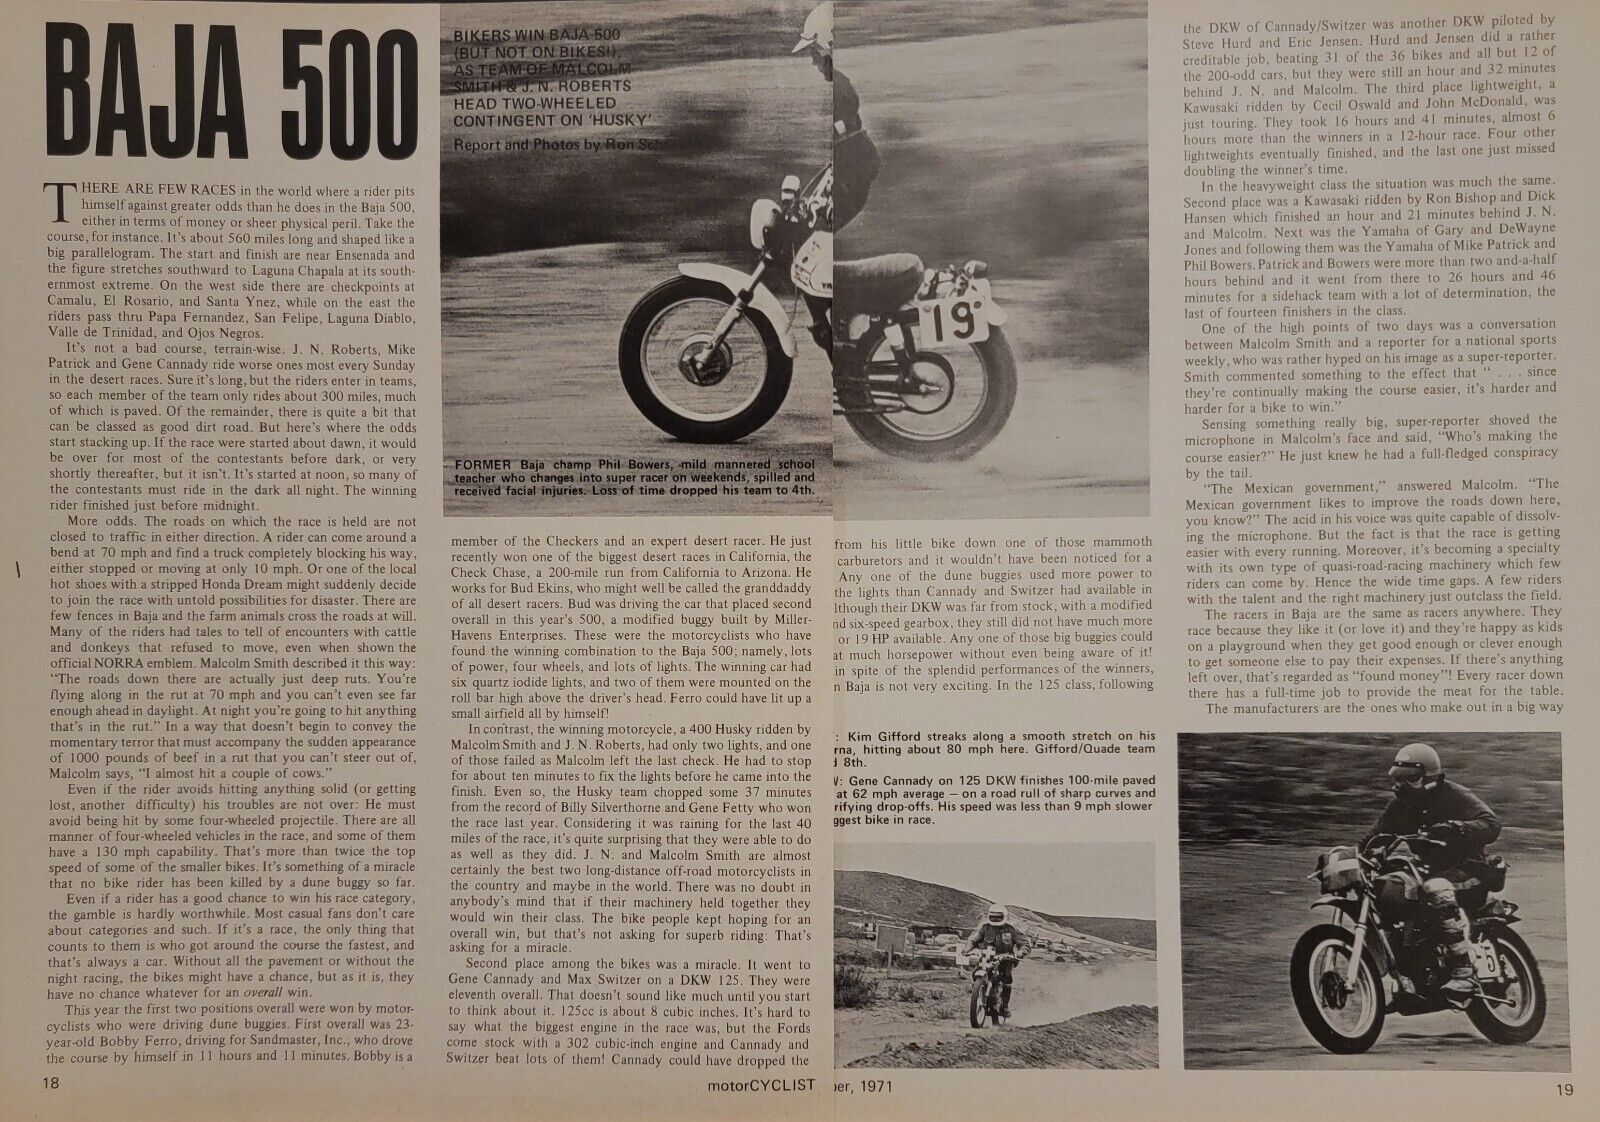 1971 Baja 500 Motorcycle Race 3p Article Phil Bowers Canaday DKW Husqvarna